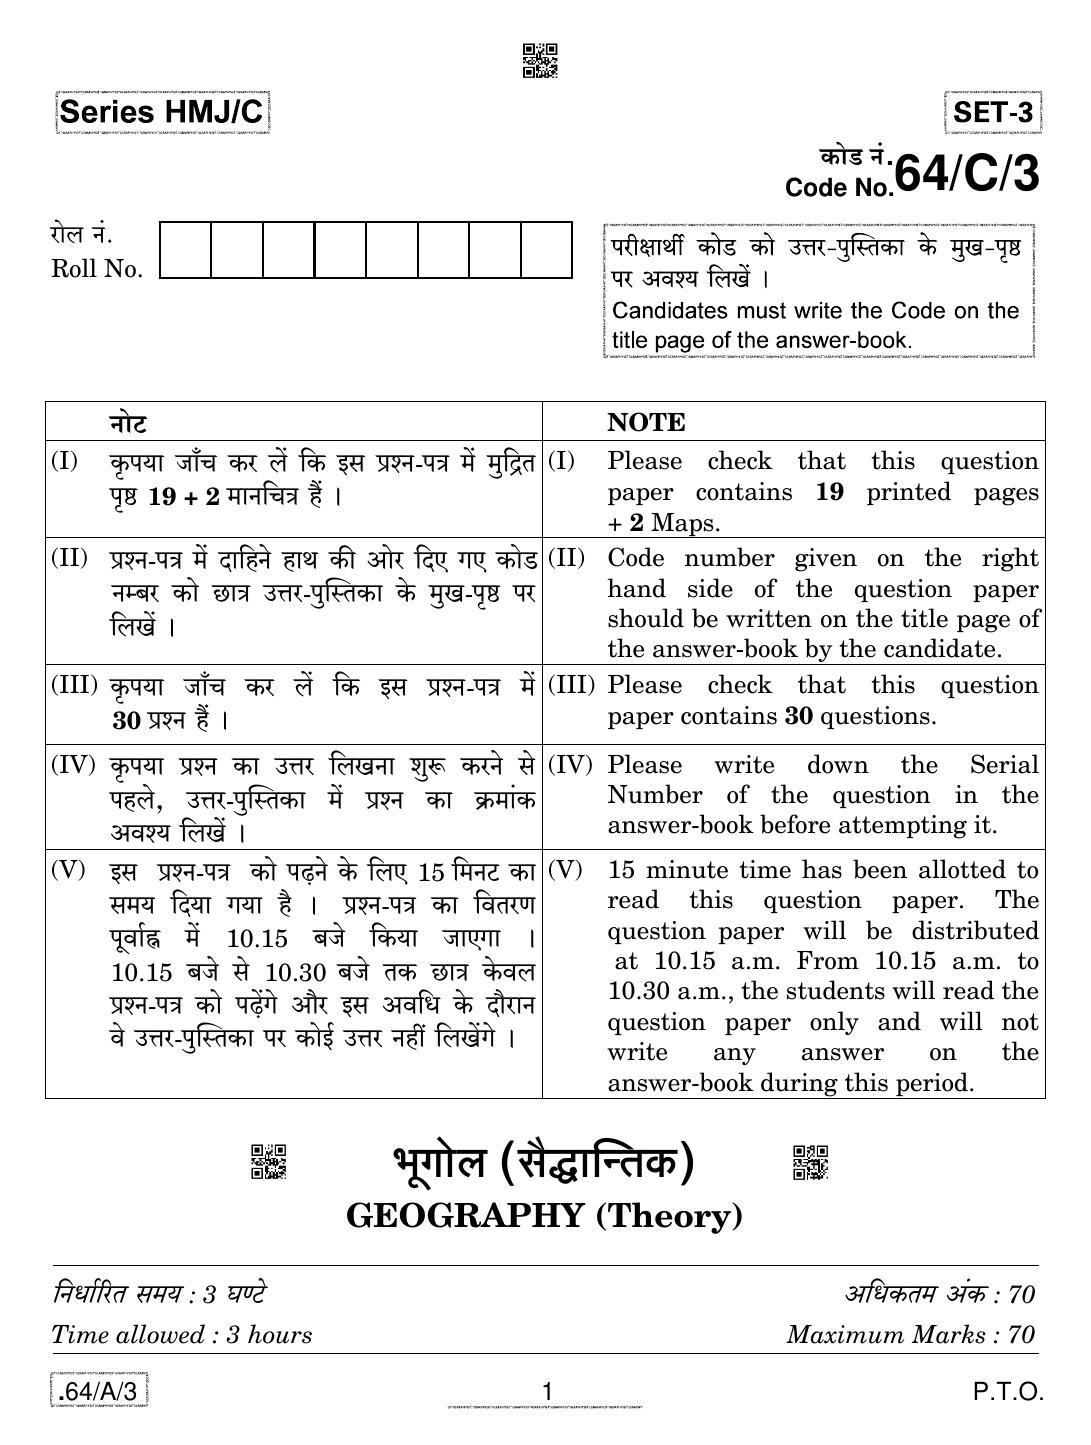 CBSE Class 12 64-C-3 - Geography 2020 Compartment Question Paper - Page 1